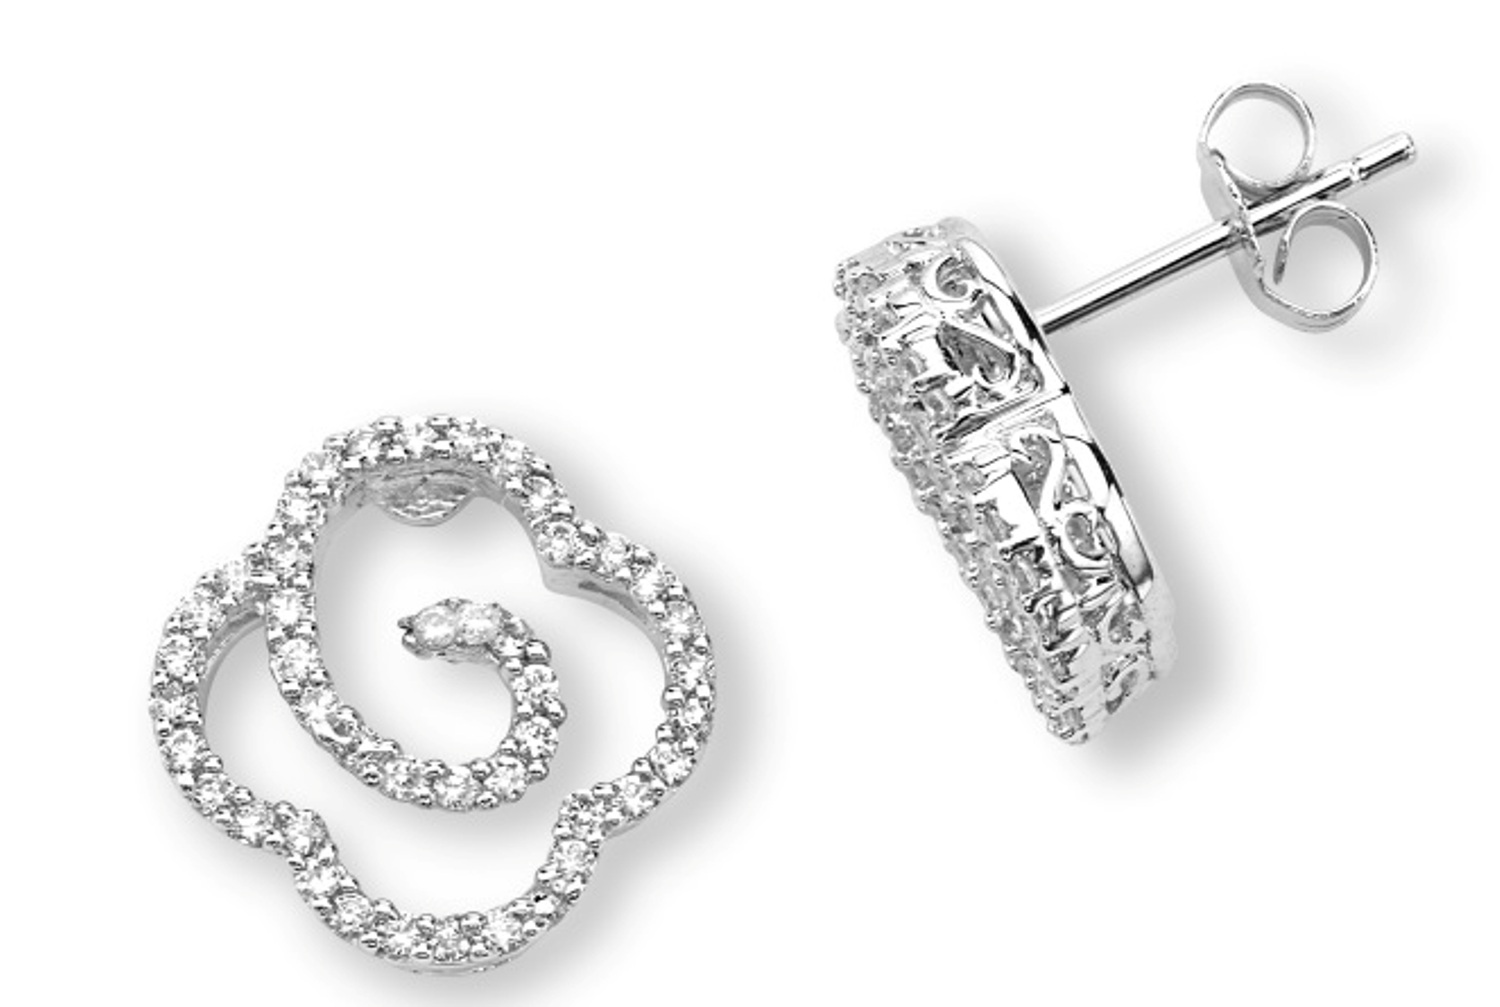 Petite Round CZ Quaterfoil Earrings, Rhodium Plated Sterling Silver.